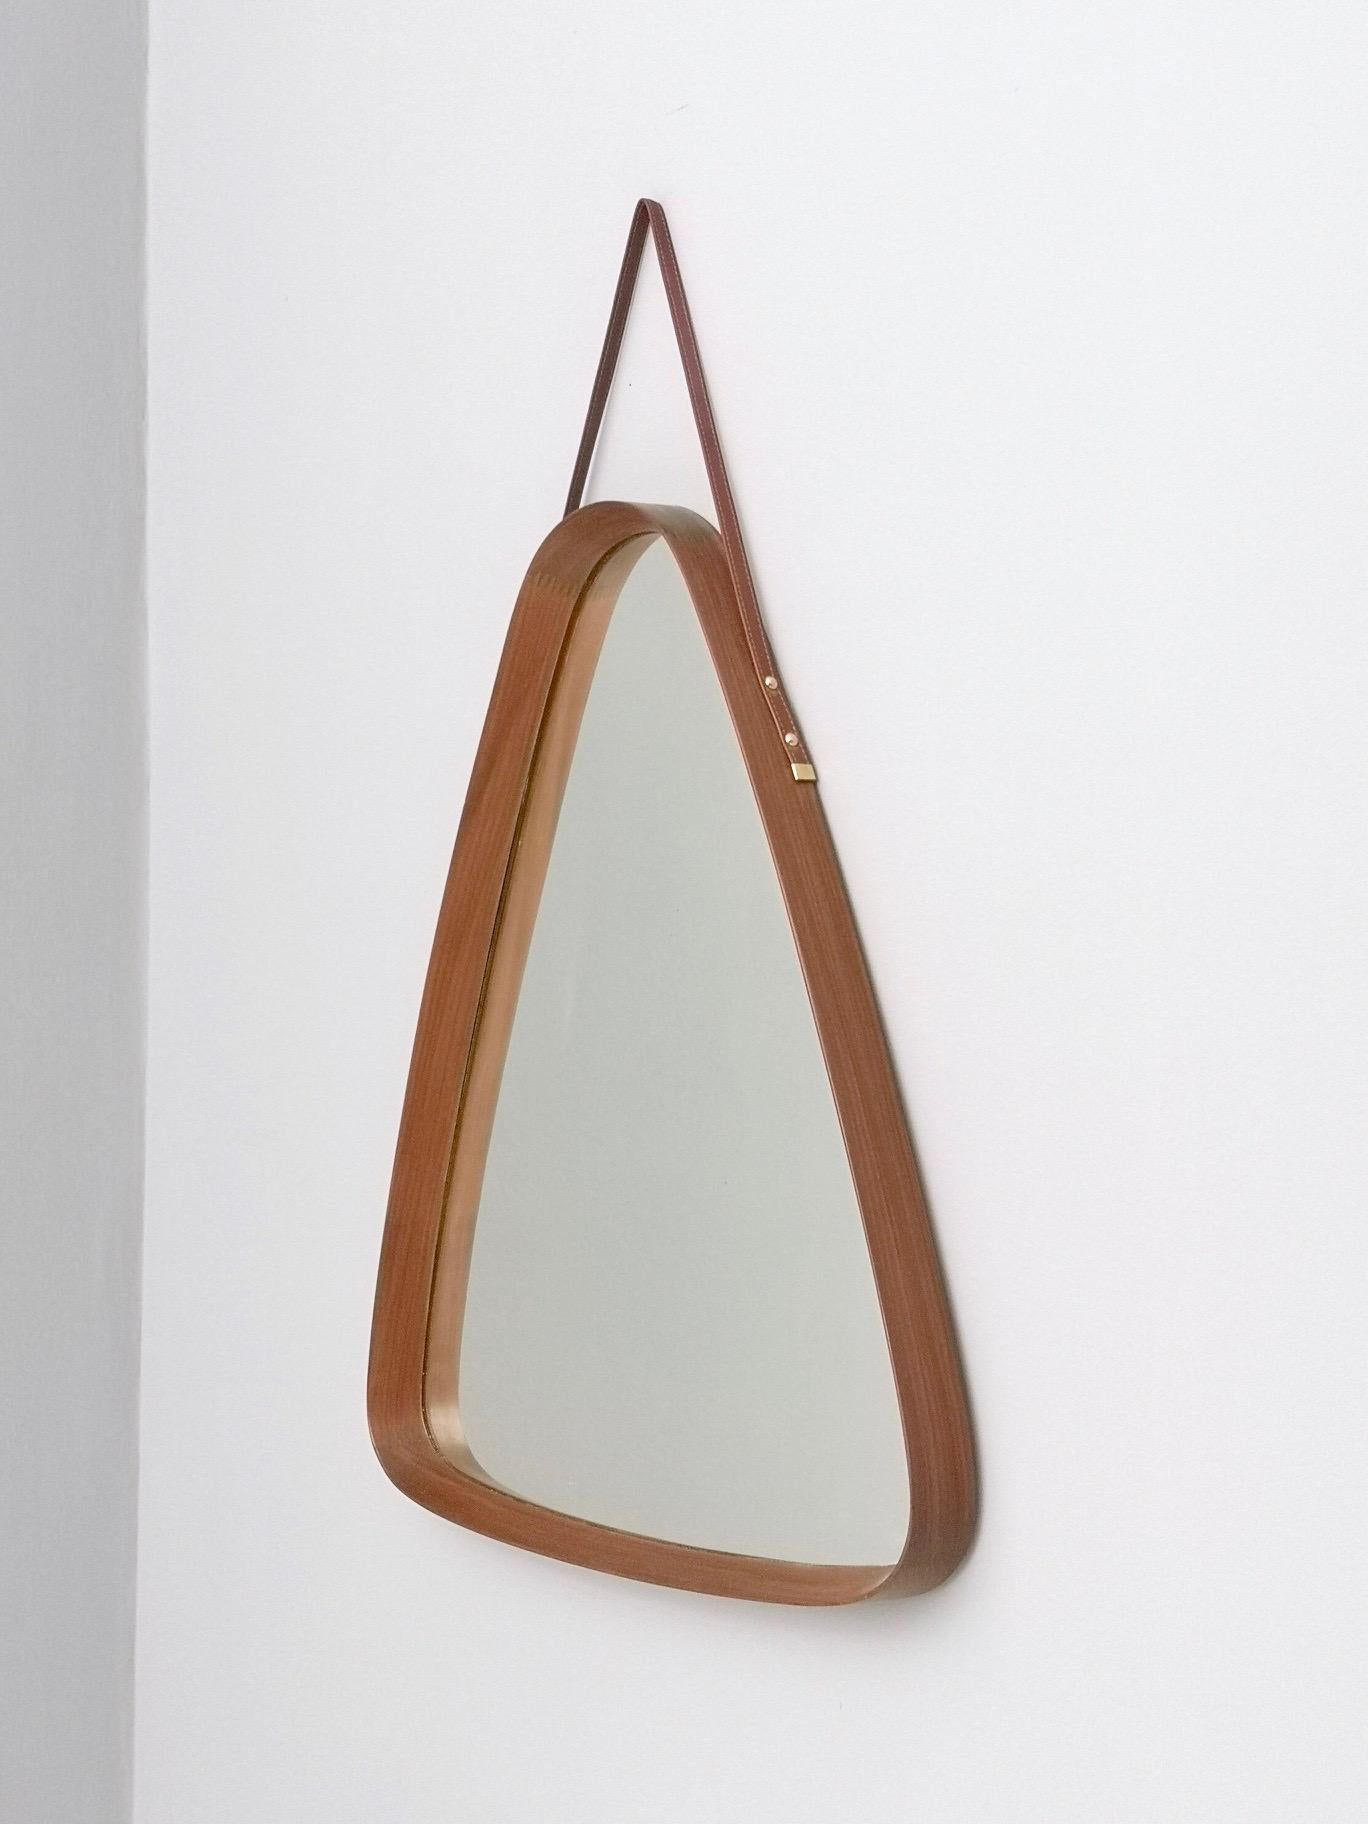 Mid-Century Modern Triangular Wall Mirror with Wooden Frame and a Leather Hook, Italy, 1960s